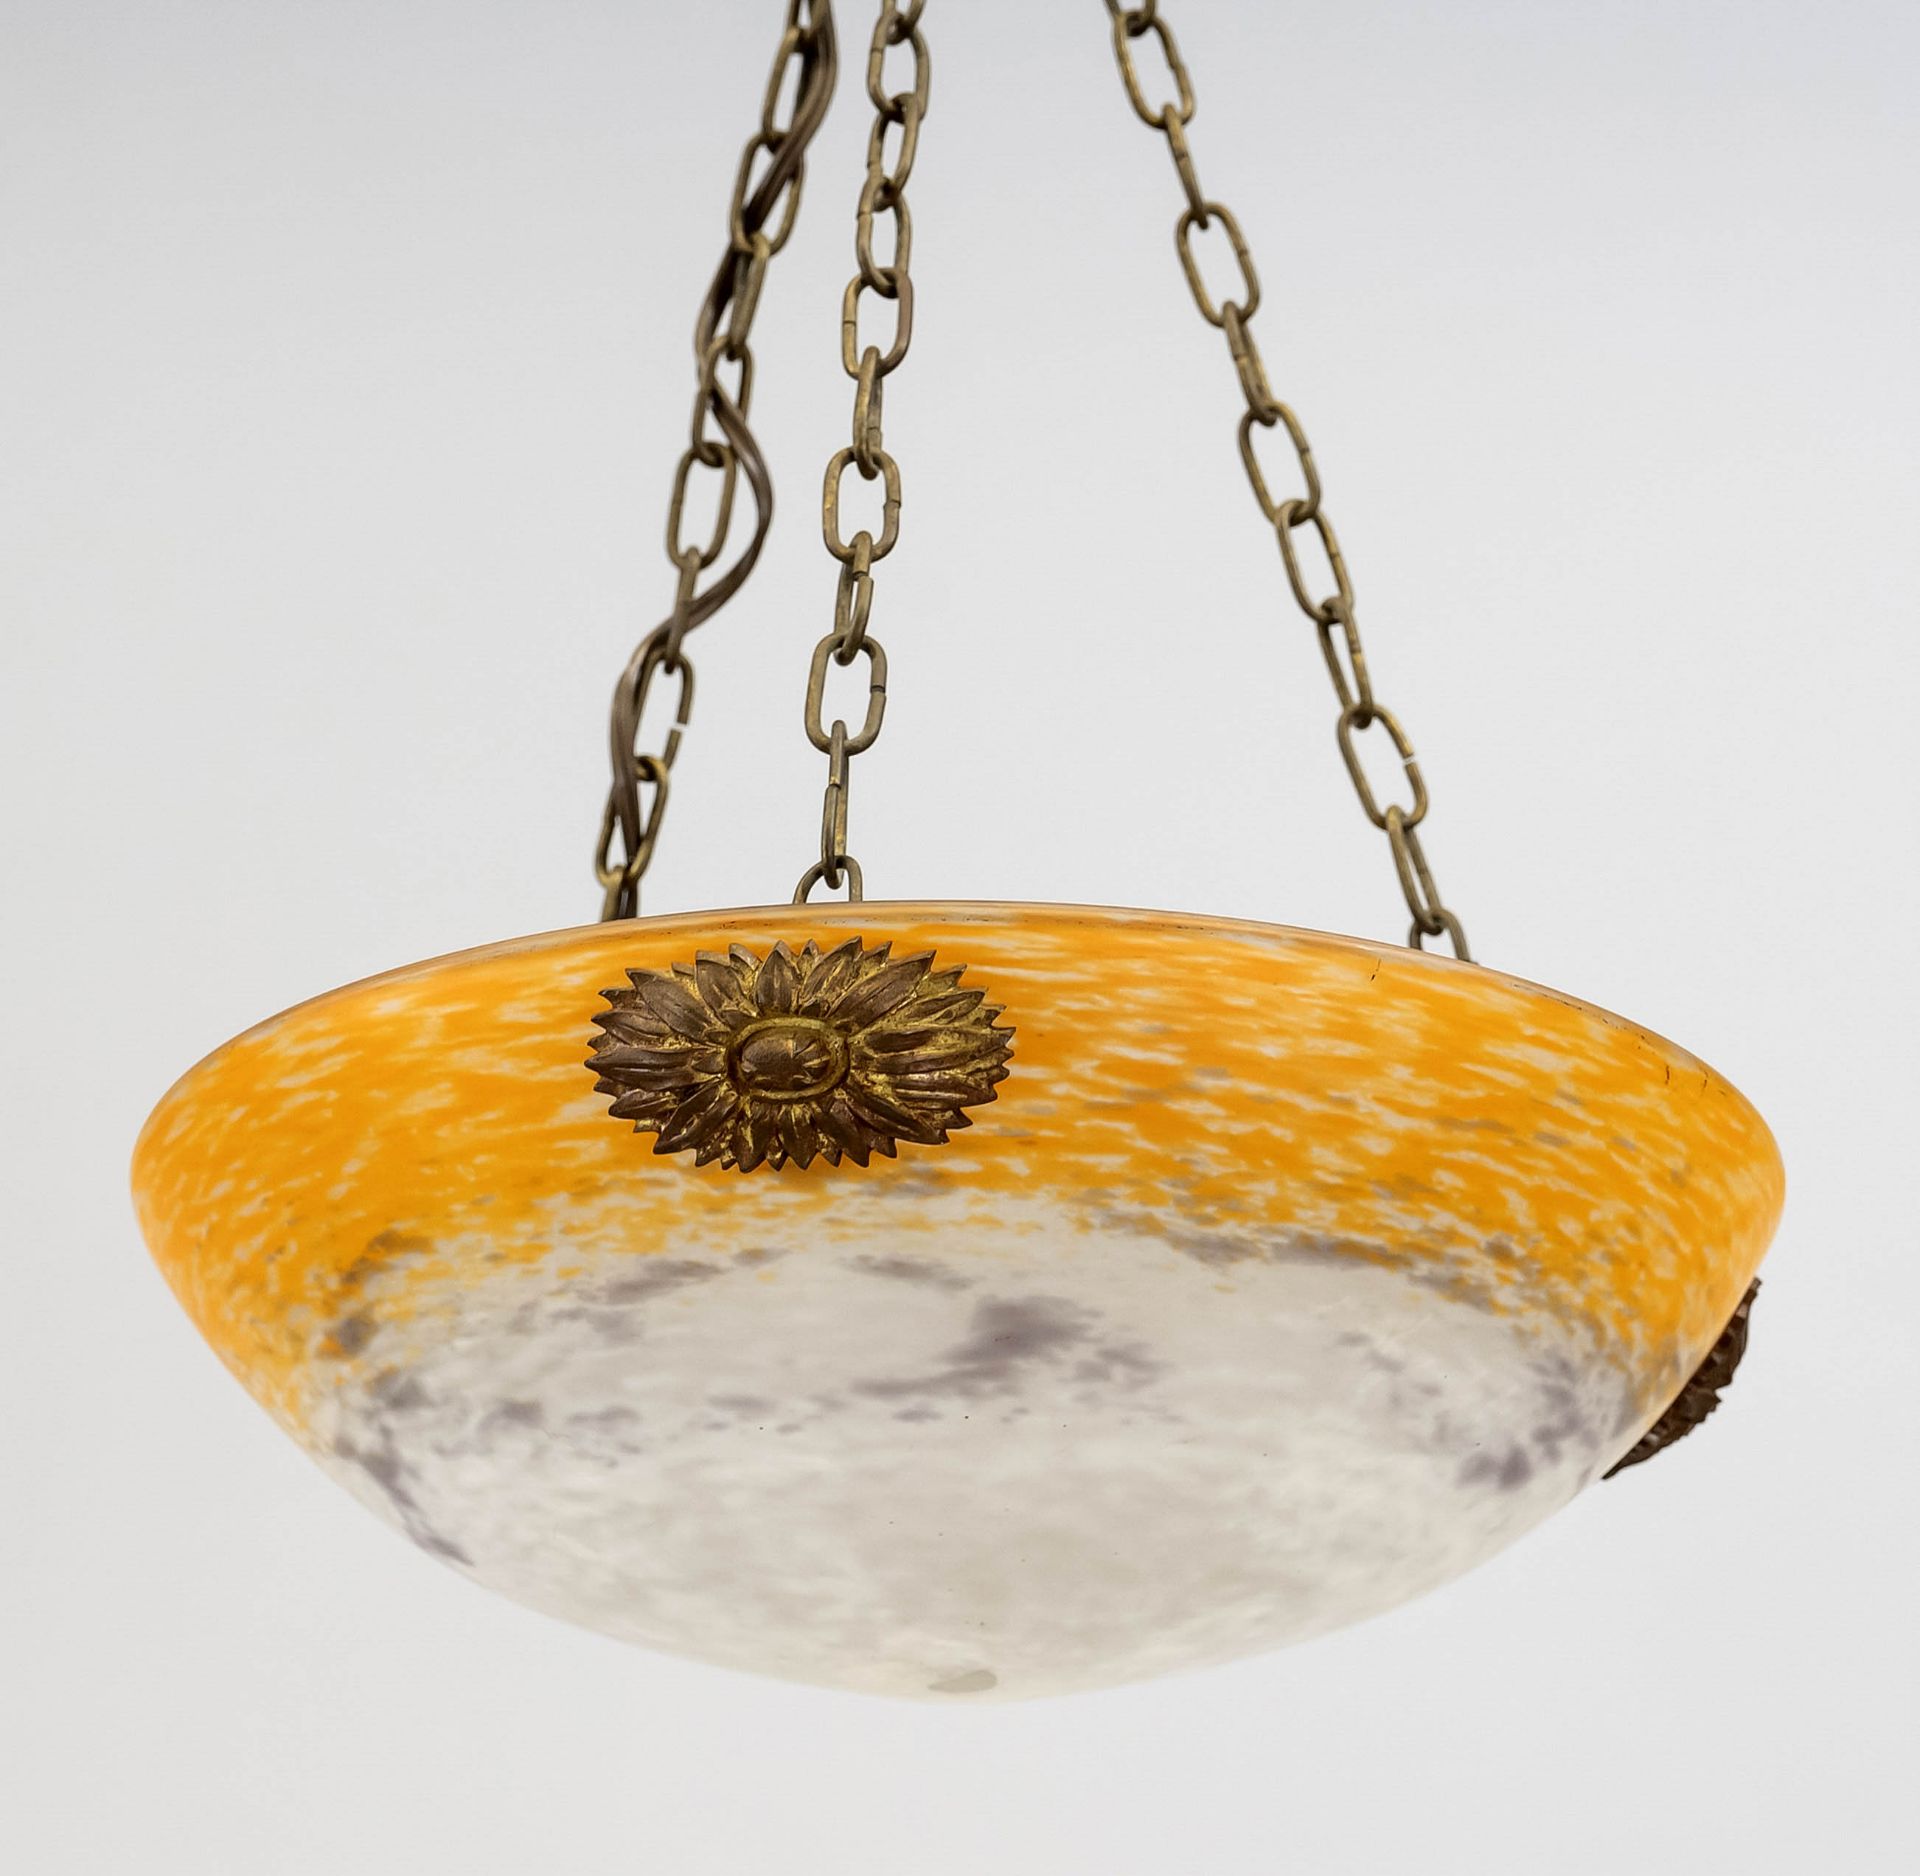 Ceiling lamp, late 19th century, bowl of colored glass on 3 chains, 1-light, slightly rubbed, h.